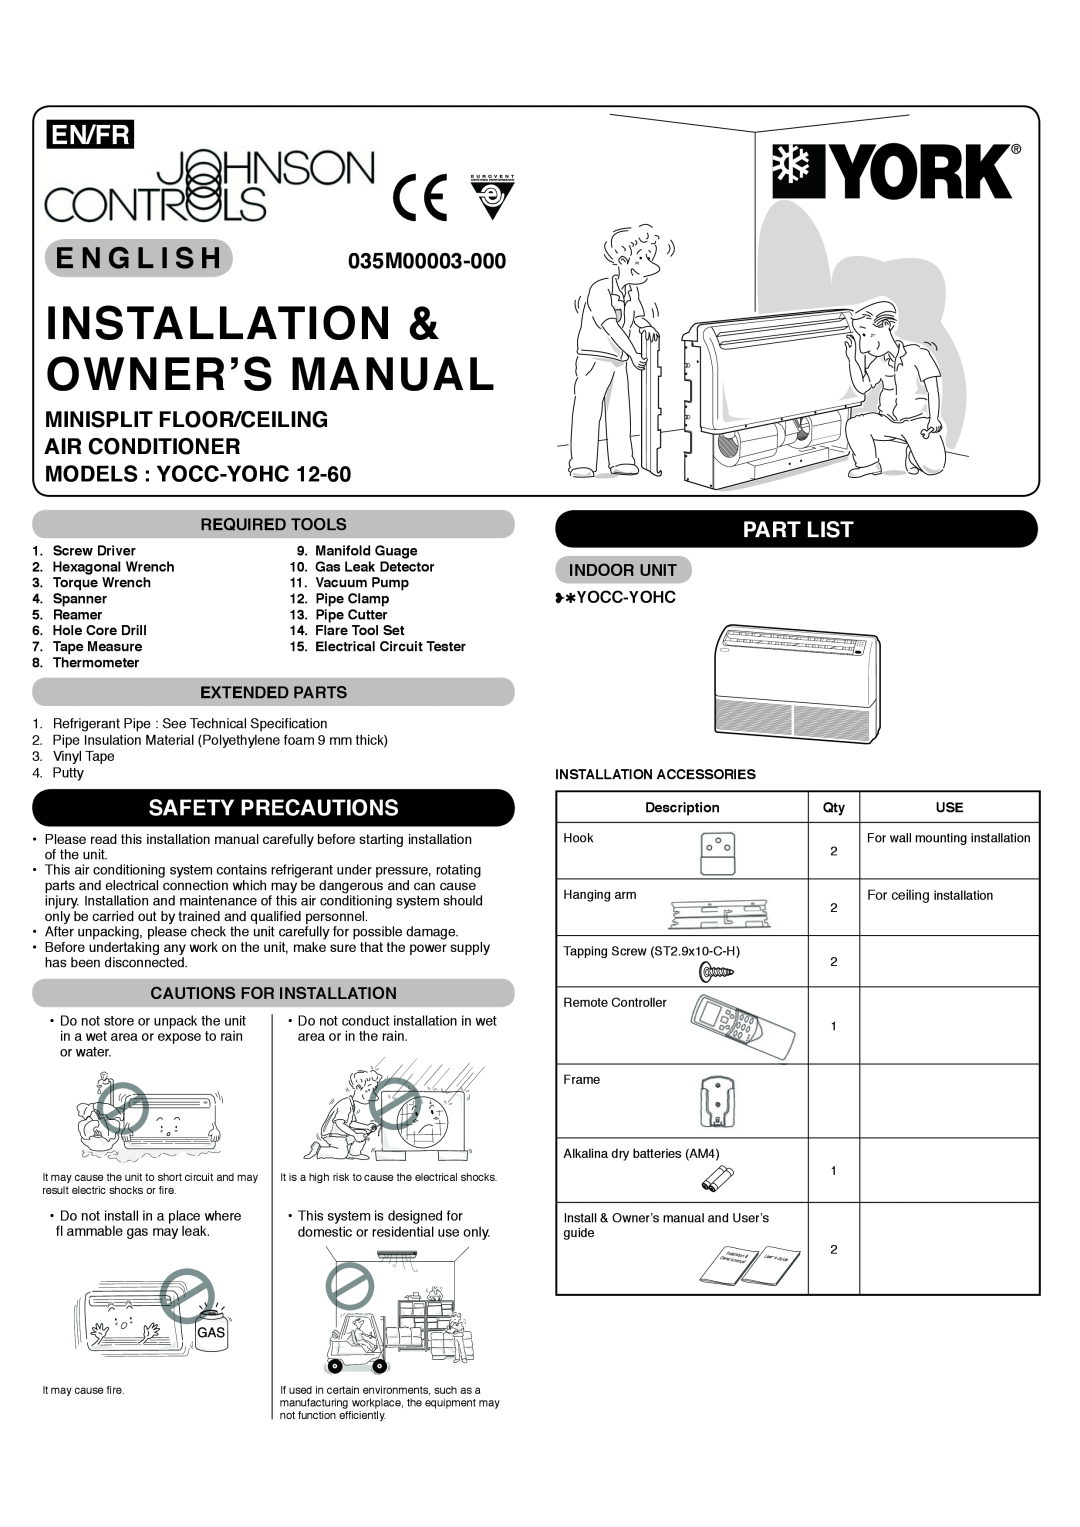 York YOCC-YOHC 12-60 owner manual Safety Precautions, Part List, Required Tools, Extended Parts, Cautions For Installation 